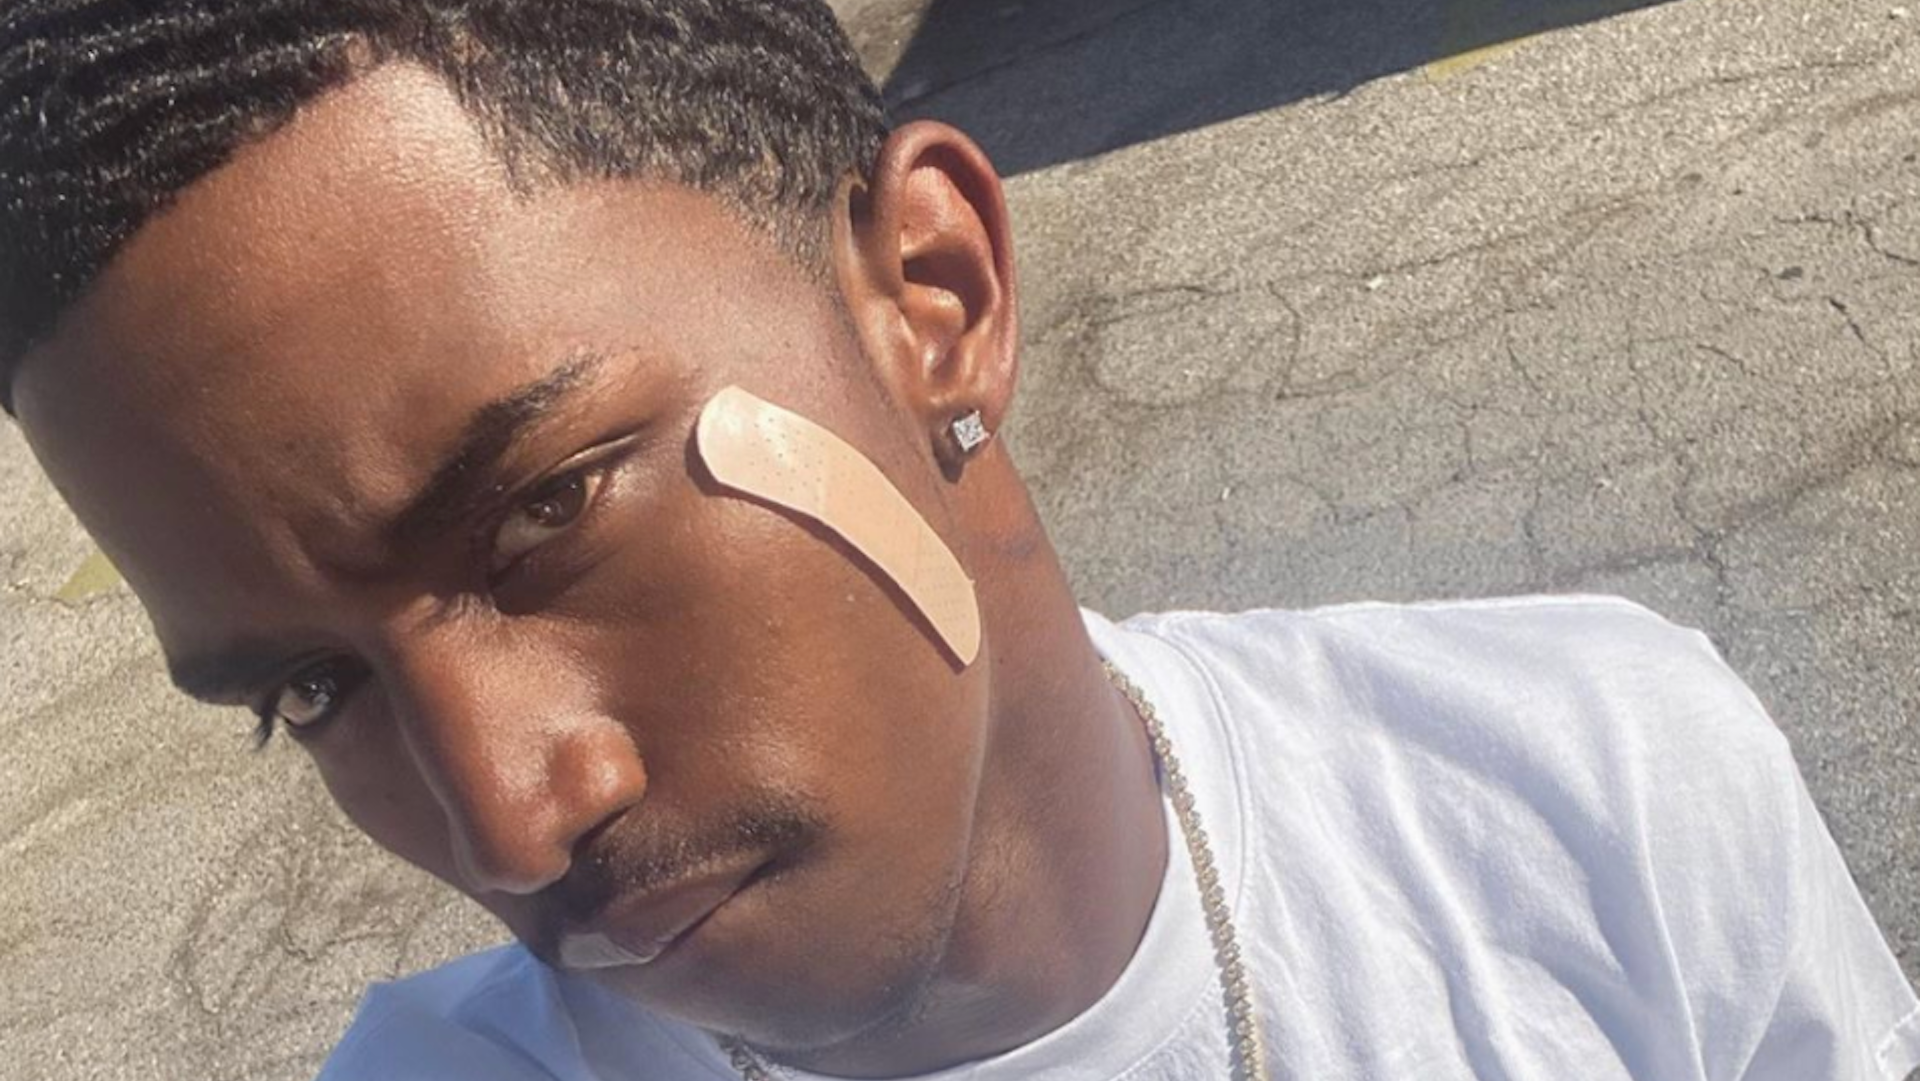 Christian Combs Hit By Alleged Drunk Driver: 'Thank God I Walked Out Alive'